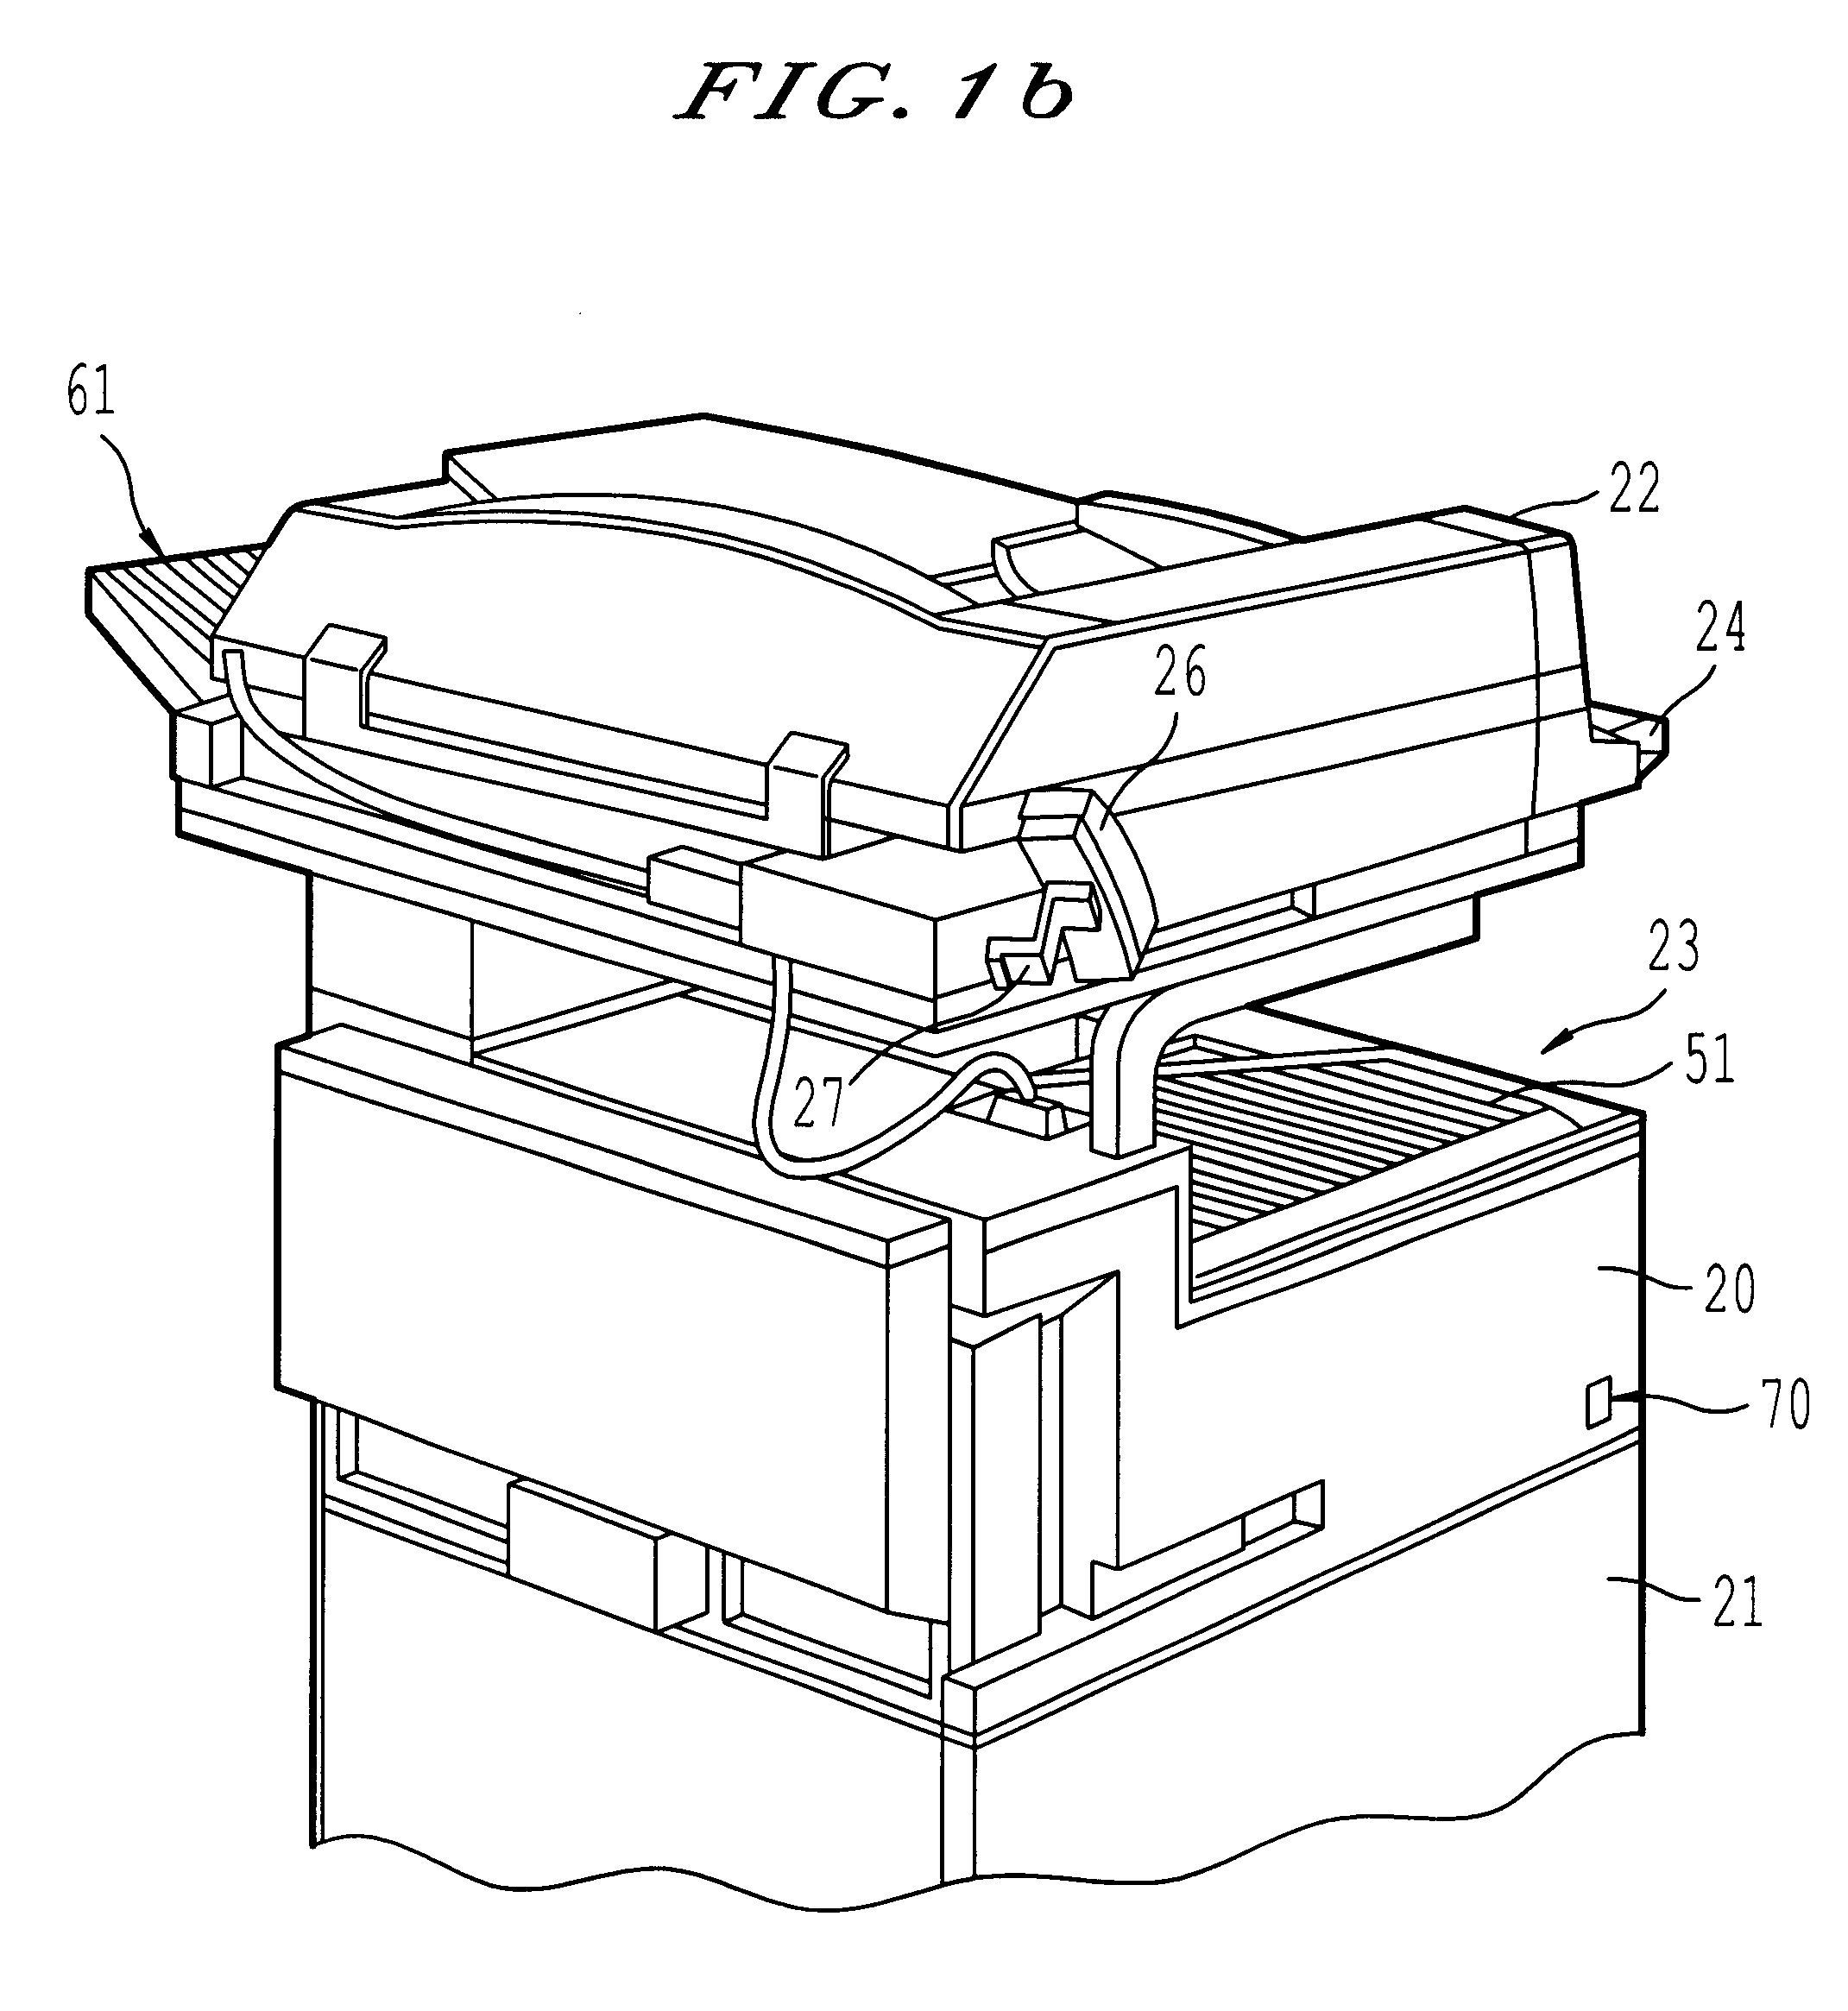 Multifunctional image forming apparatus having a covered main power switch